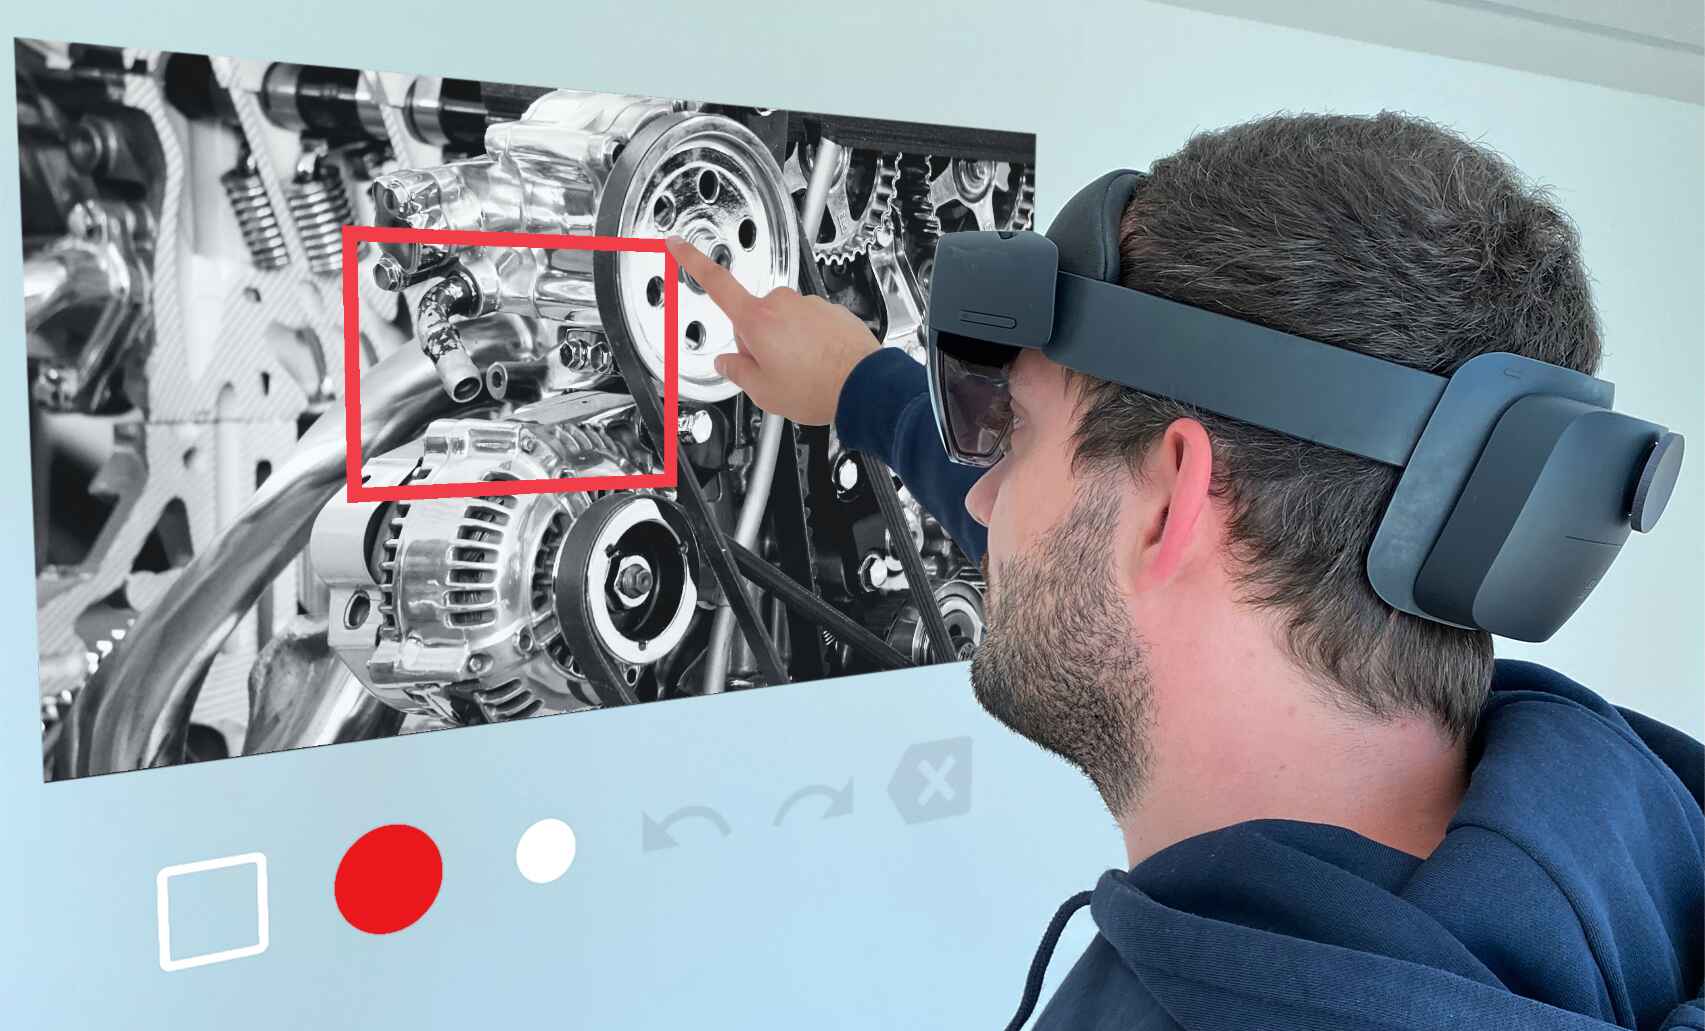 How To Use A HoloLens Device